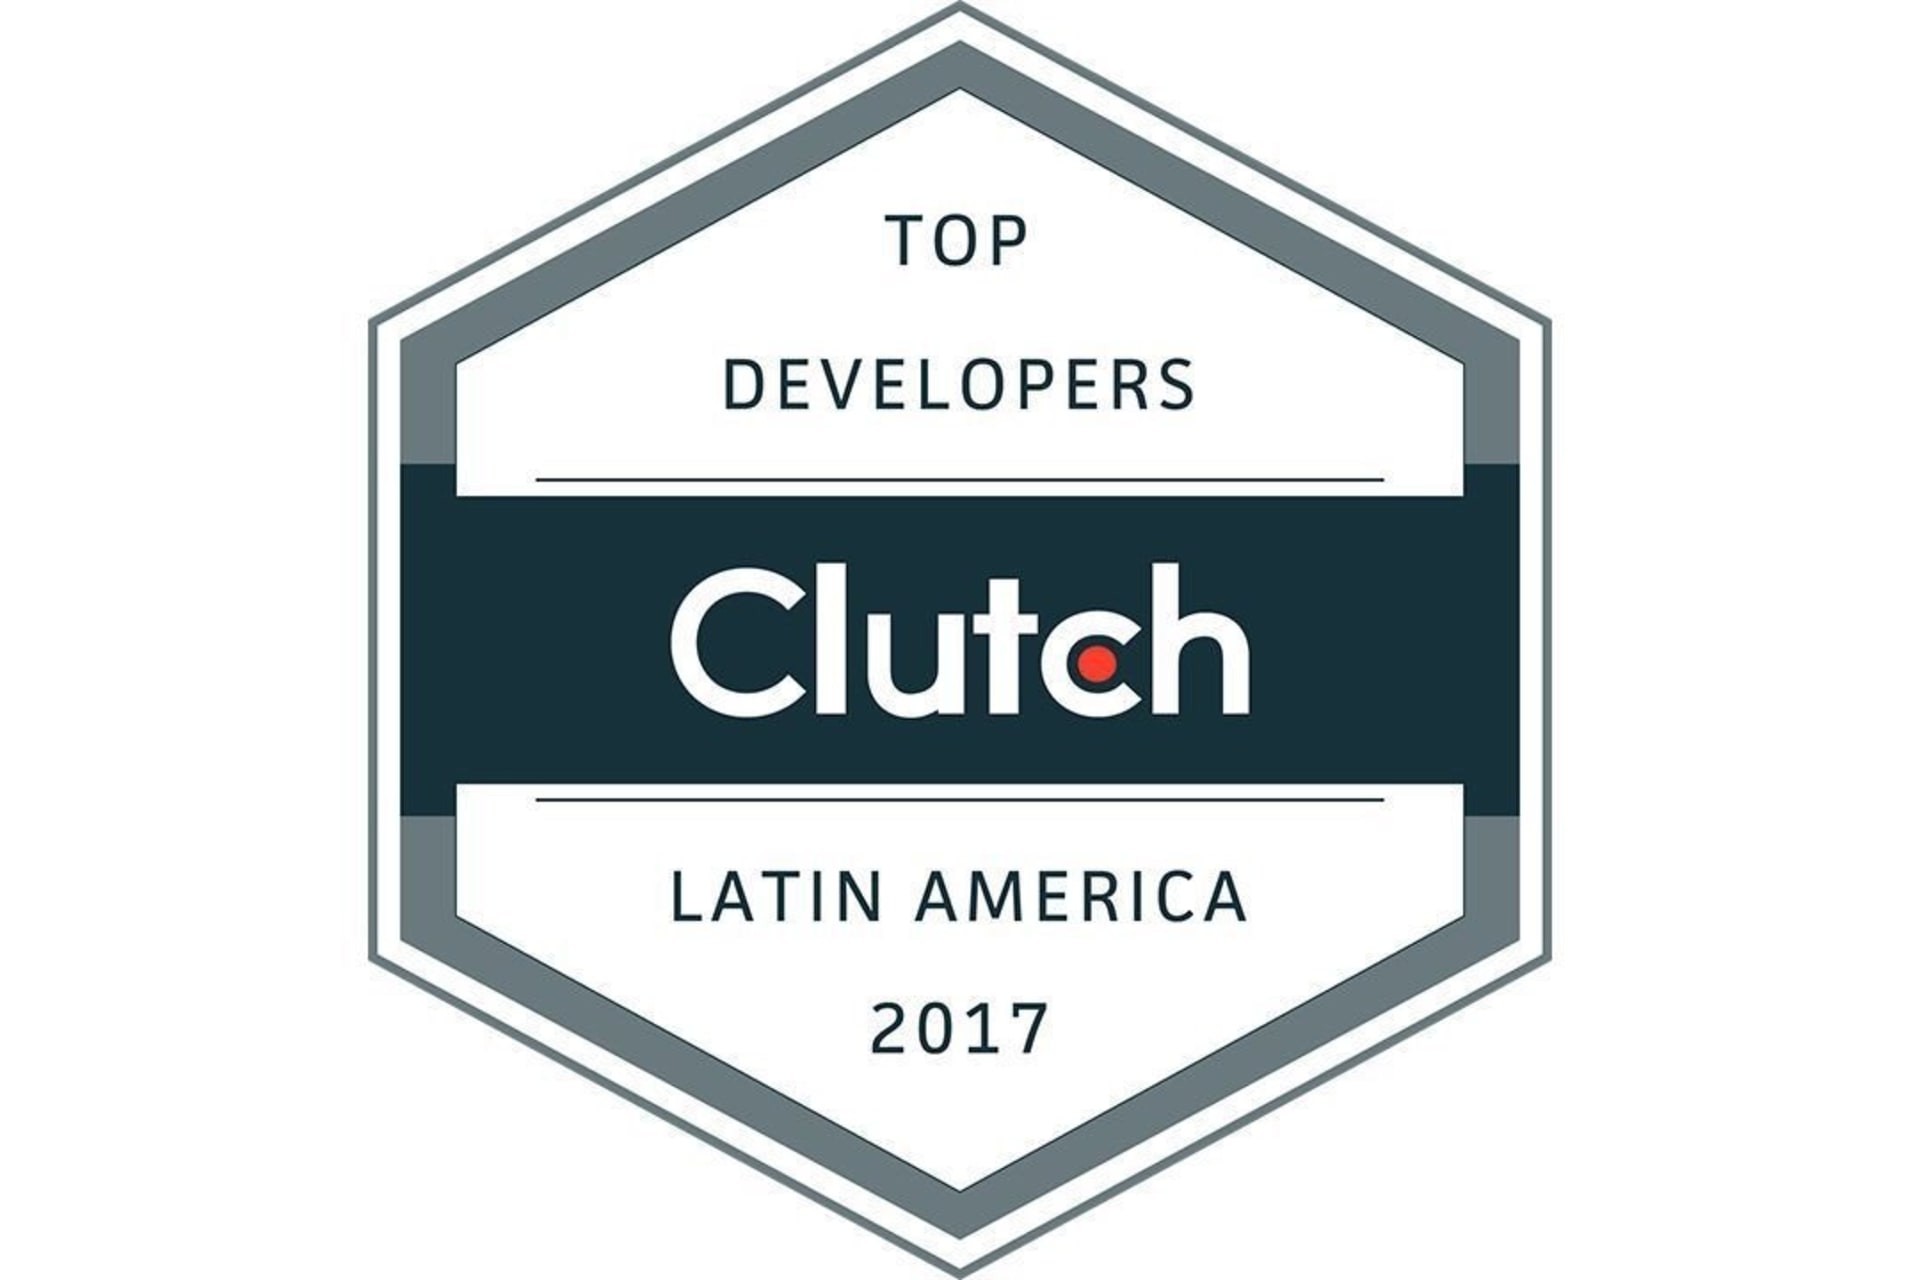 Clutch Top Developers in Latin America Badge for BairesDev